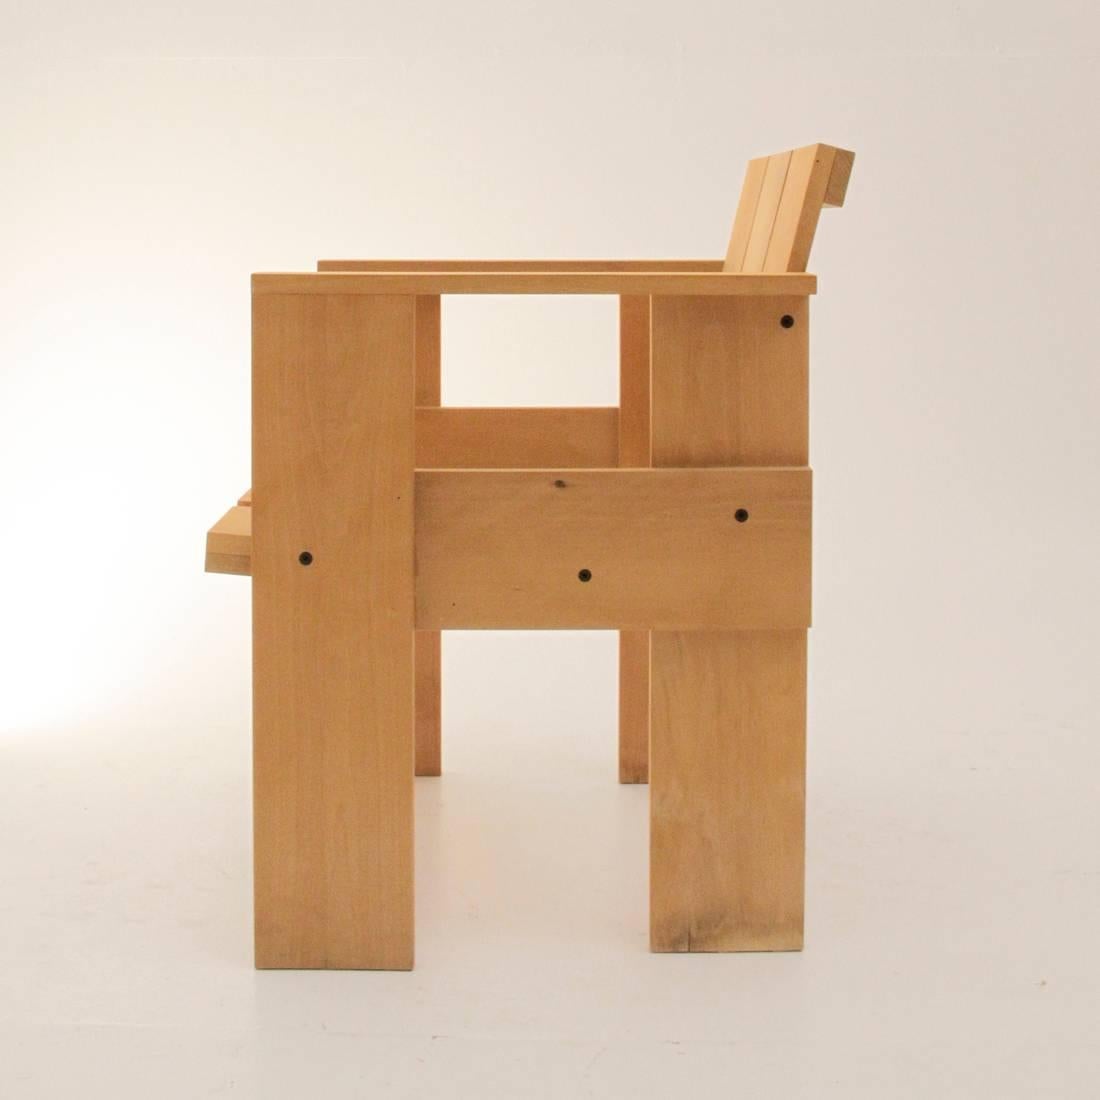 Italian Set of Six Crate Chairs by Gerrit Rietveld for Cassina